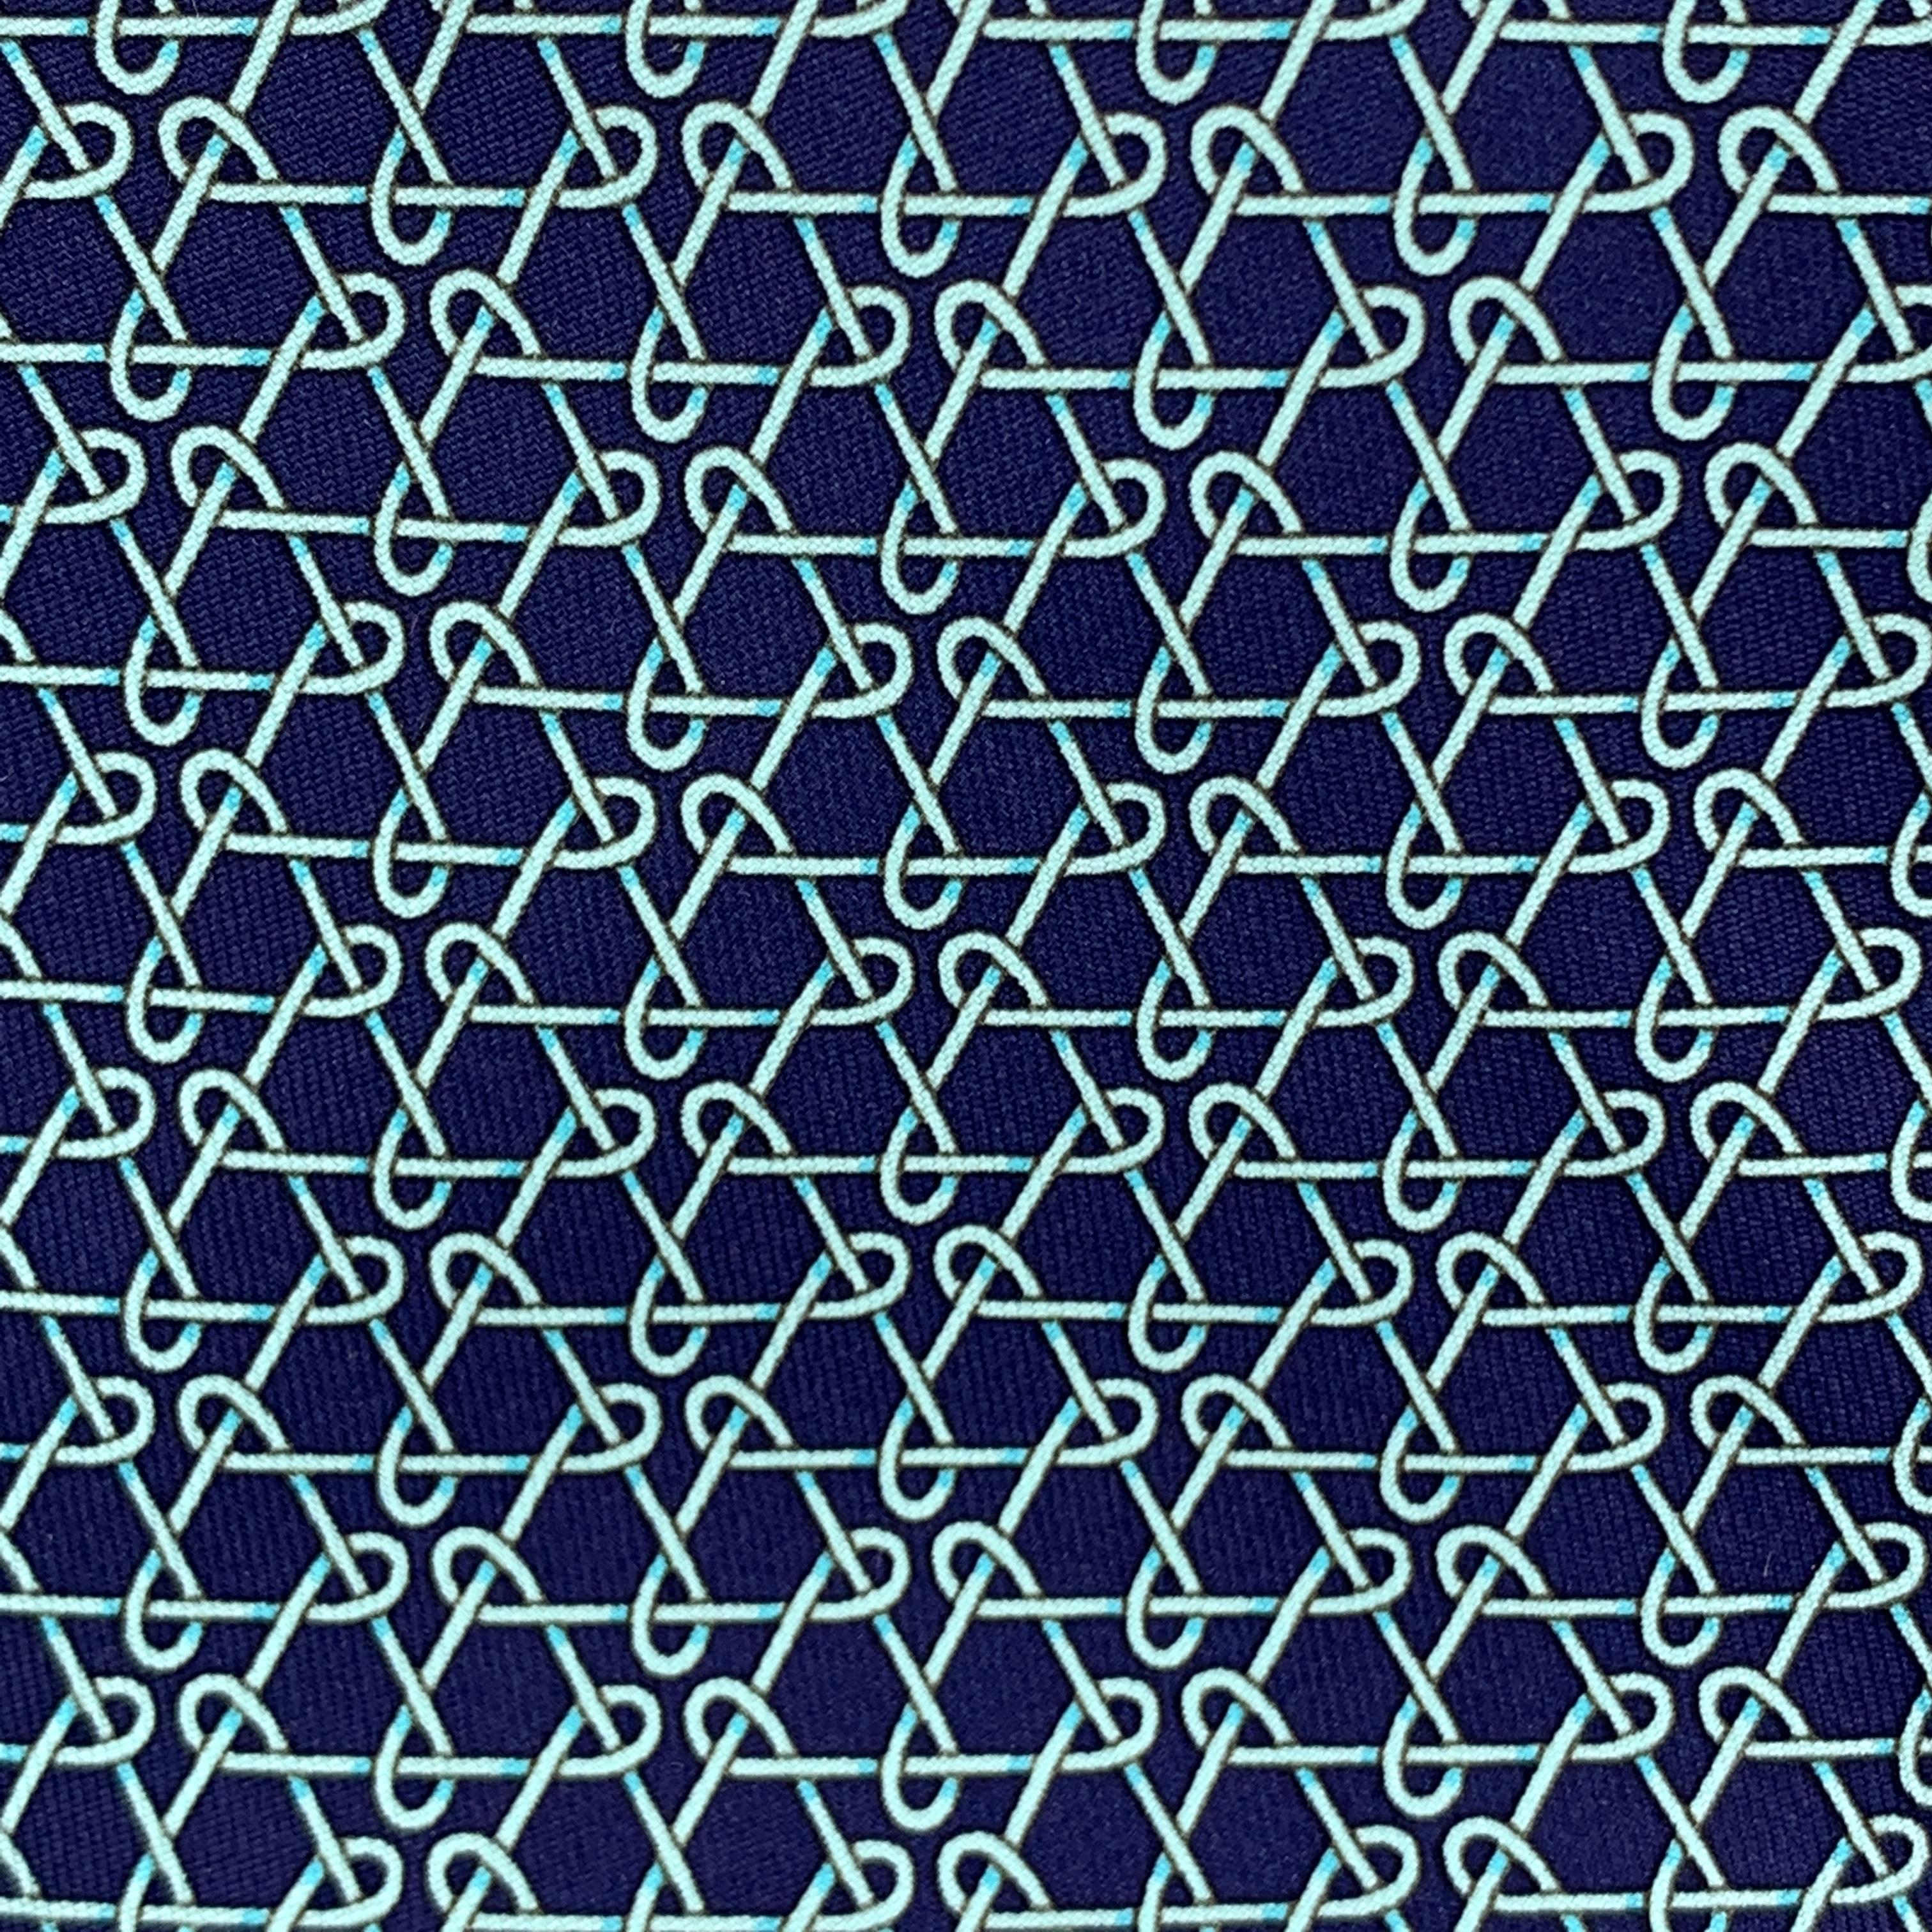 HERMES necktie comes in navy blue silk twill with all over aqua green interlock print. Made in France.

Excellent Pre-Owned Condition.

Width: 3.75 in. 